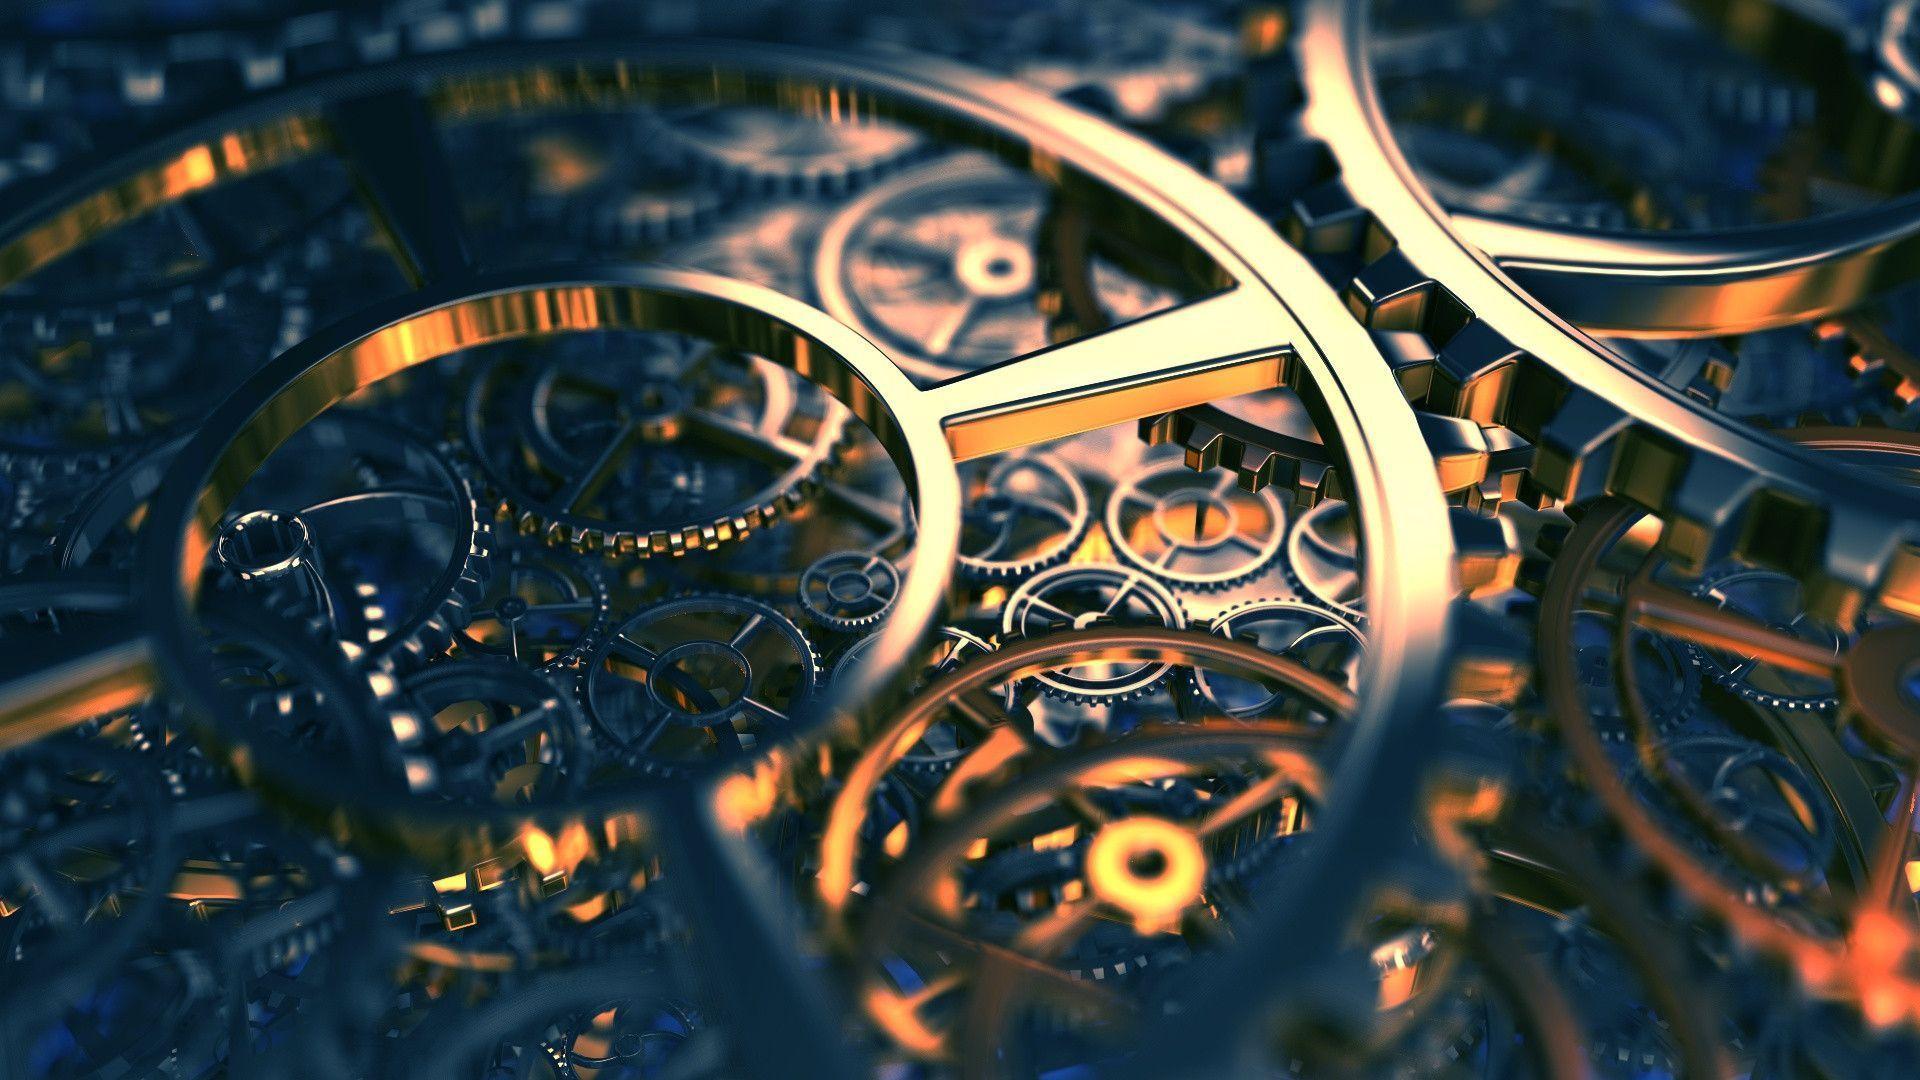 Steampunk Wallpaper HD 1920x1080 Image & Picture